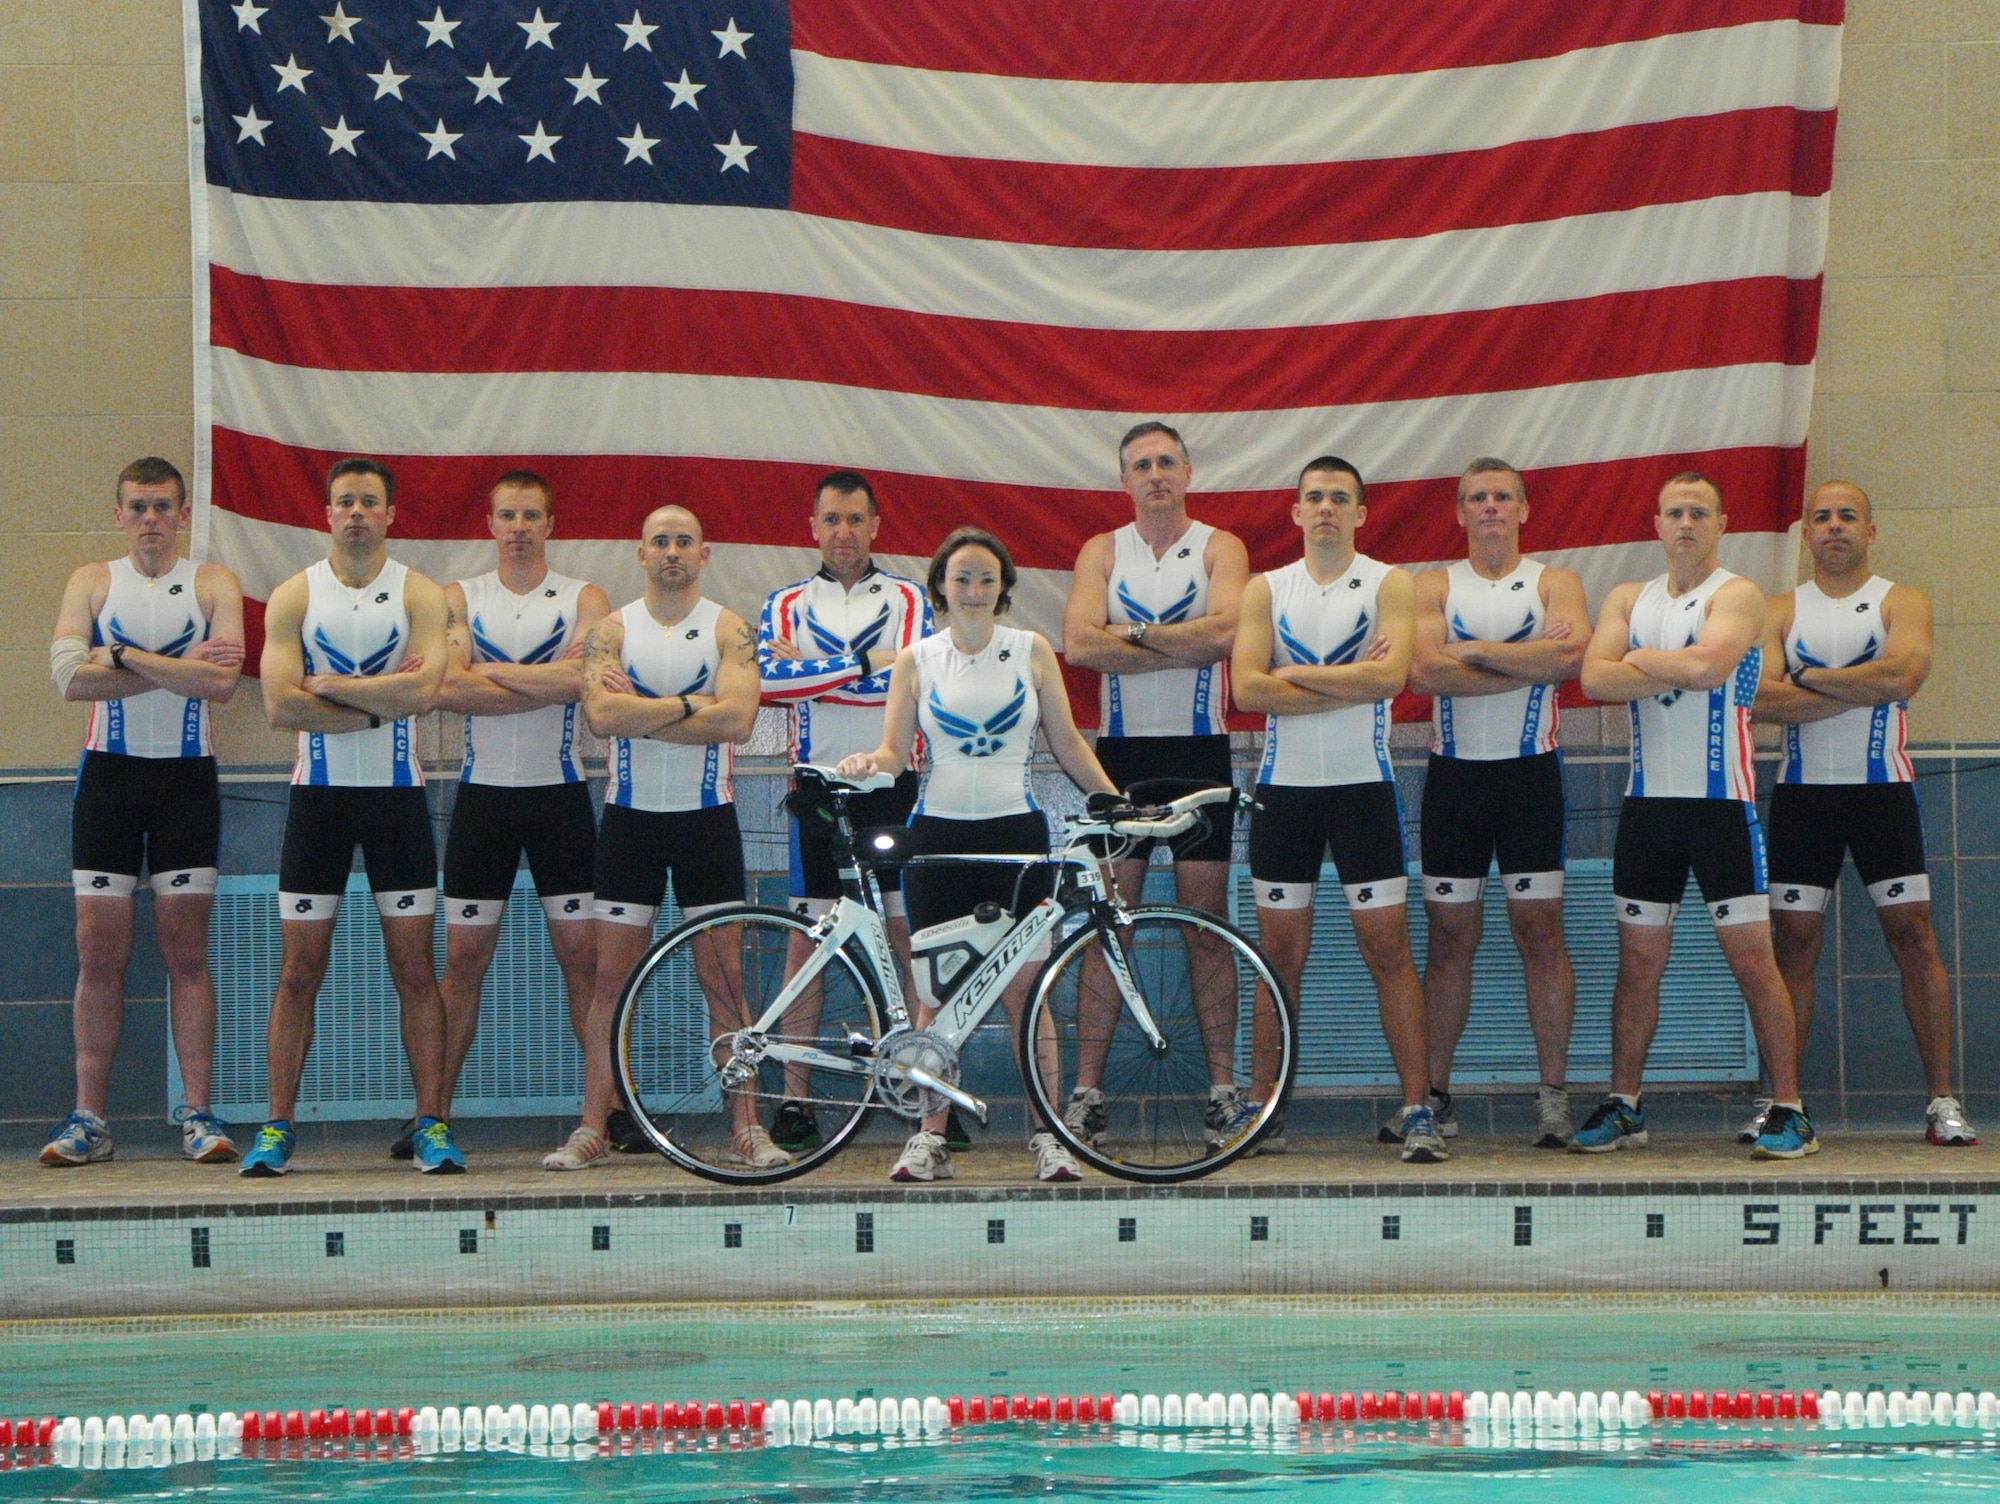 Wright-Patterson AFB's Varsity Triathlon team will complete in numerous events throughout the summer with its first competition April 20 at Miami University Student Foundation Triathlon in Oxford, Ohio.